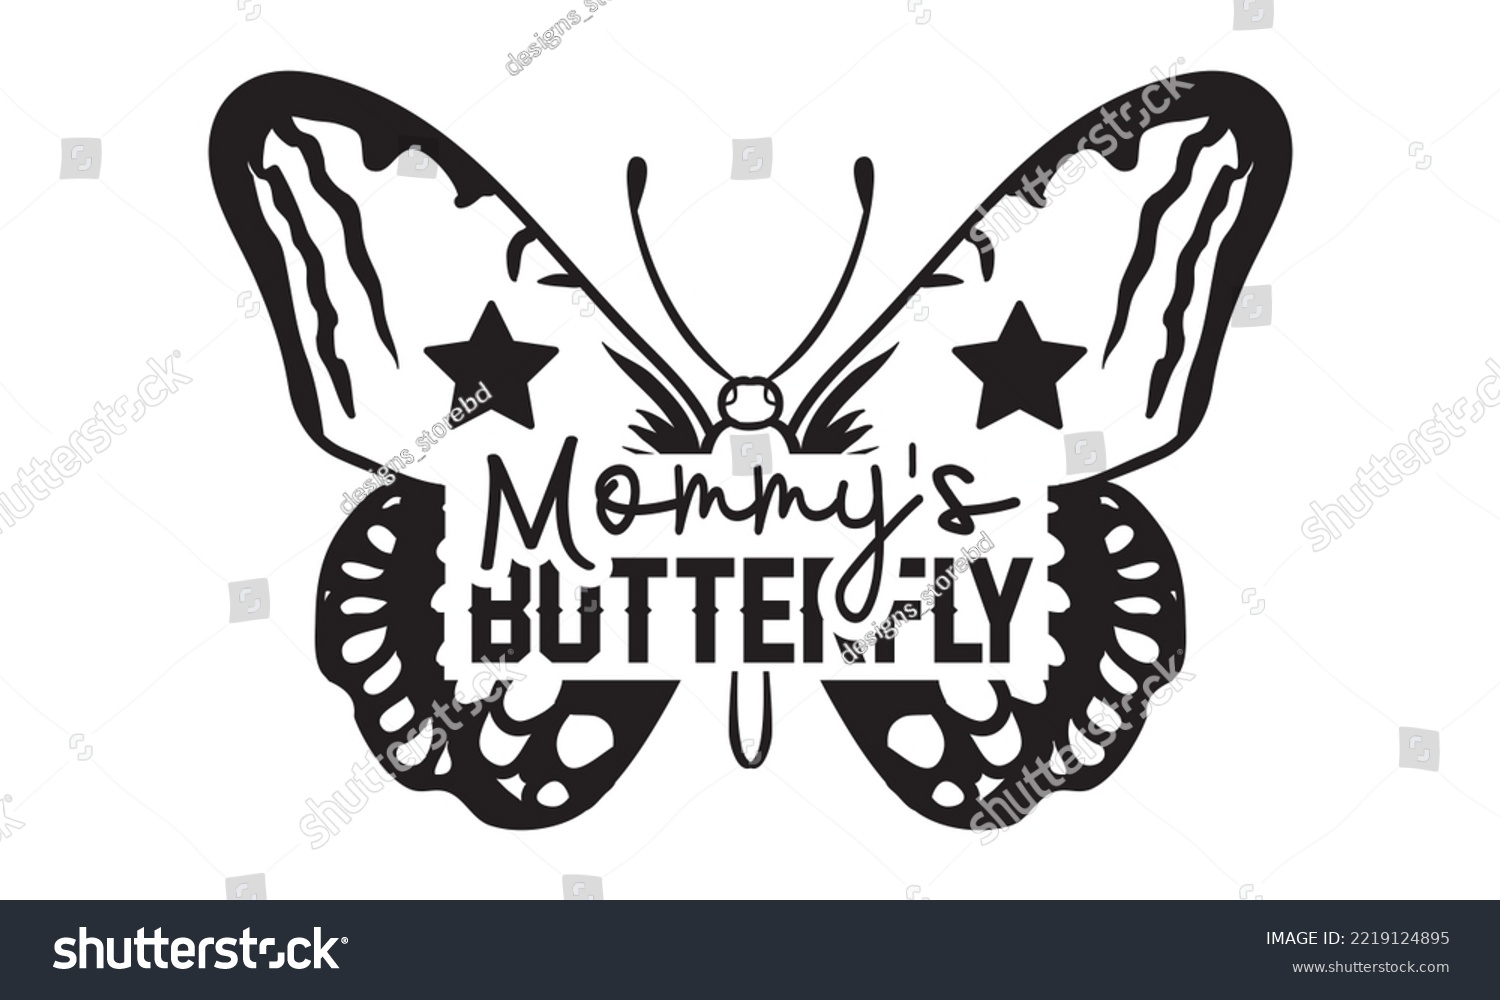 SVG of Mommy's Butterfly Svg, Butterfly svg, Butterfly svg t-shirt design, butterflies and daisies positive quote flower watercolor margarita mariposa stationery, mug, t shirt, svg, eps 10 svg